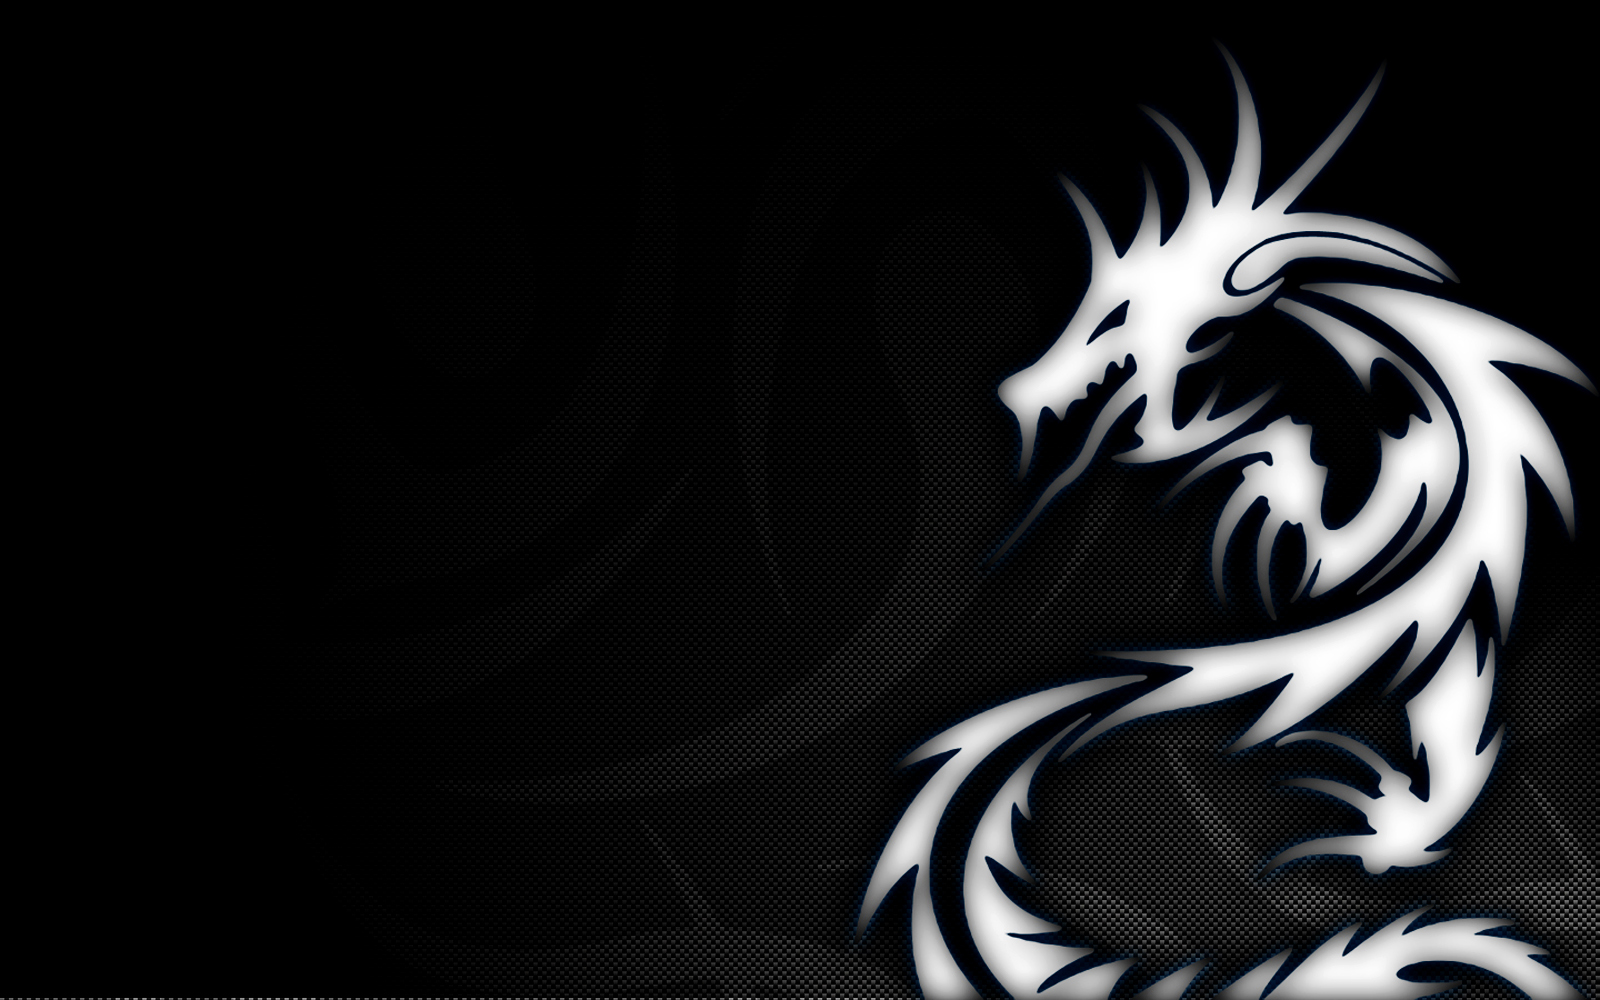 Dragon Logo Designs HD Wallpapers Download Free Wallpapers in HD for